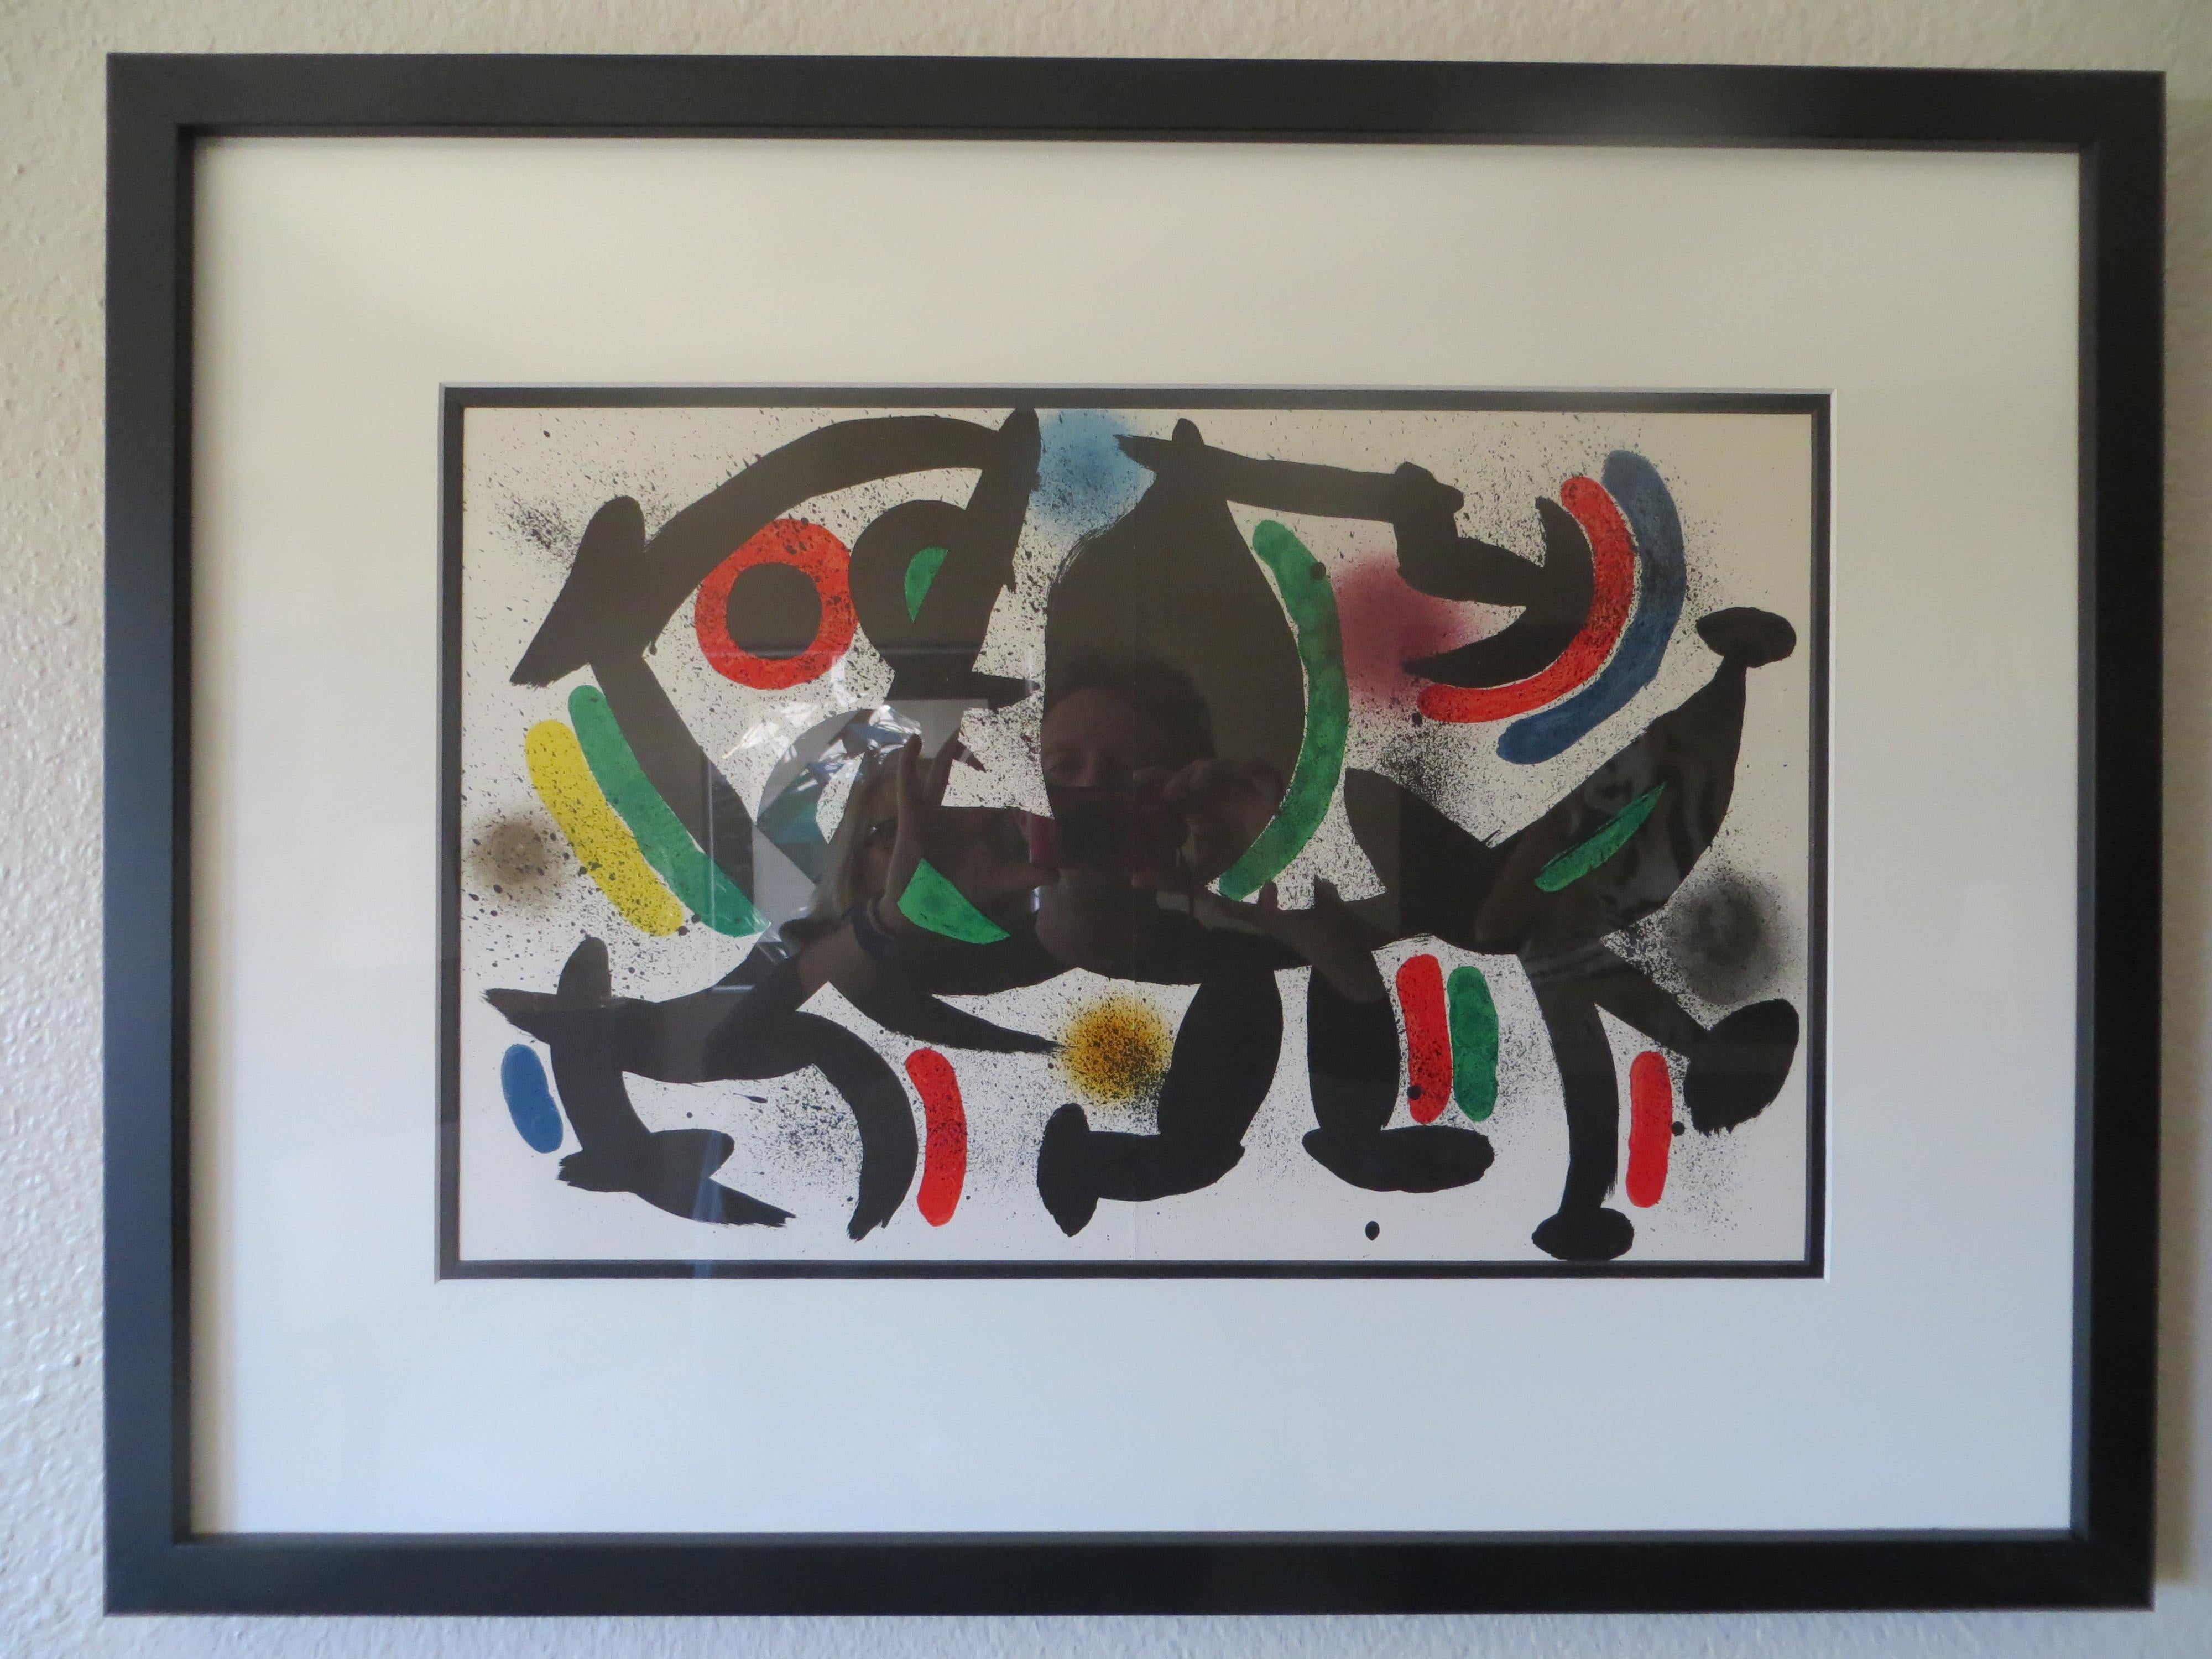 Designed by Joan Miro (Spanish, 1893 – 1983)
Untitled,not signed and not numbered 
Lithograph offset on paper, printed and edited by Mourlot, Paris, 1972 
Joan Miro was a Catalan painter, sculptor and ceramicist born in Barcelona. A museum dedicated